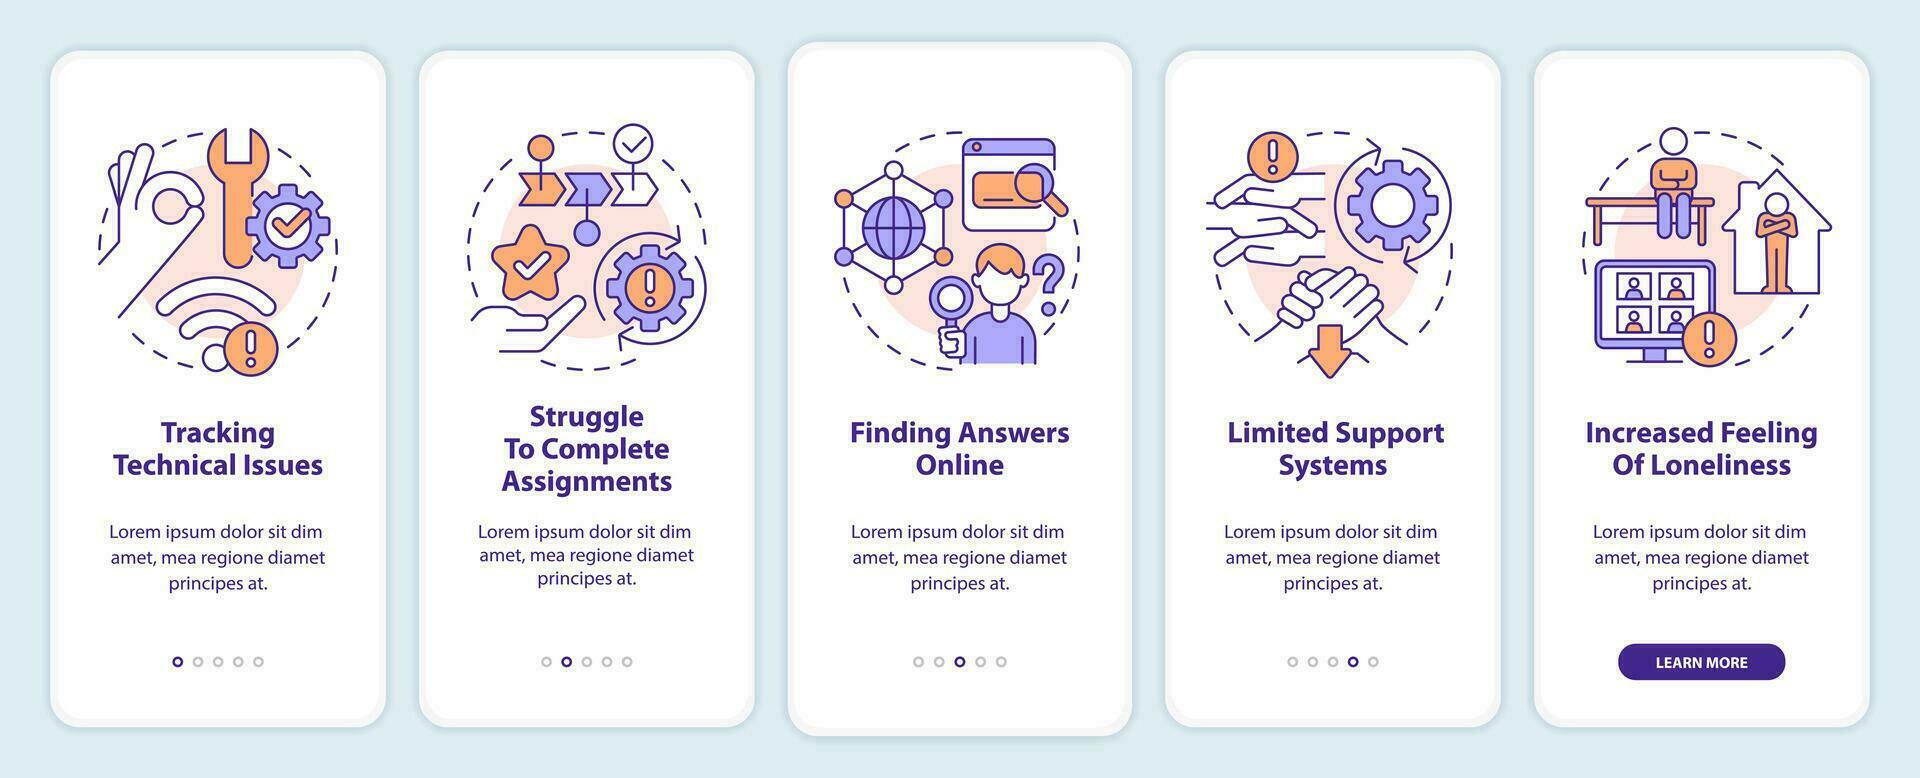 Digital learning stress onboarding mobile app screen. Feeling lonely walkthrough 5 steps editable graphic instructions with linear concepts. UI, UX, GUI template vector